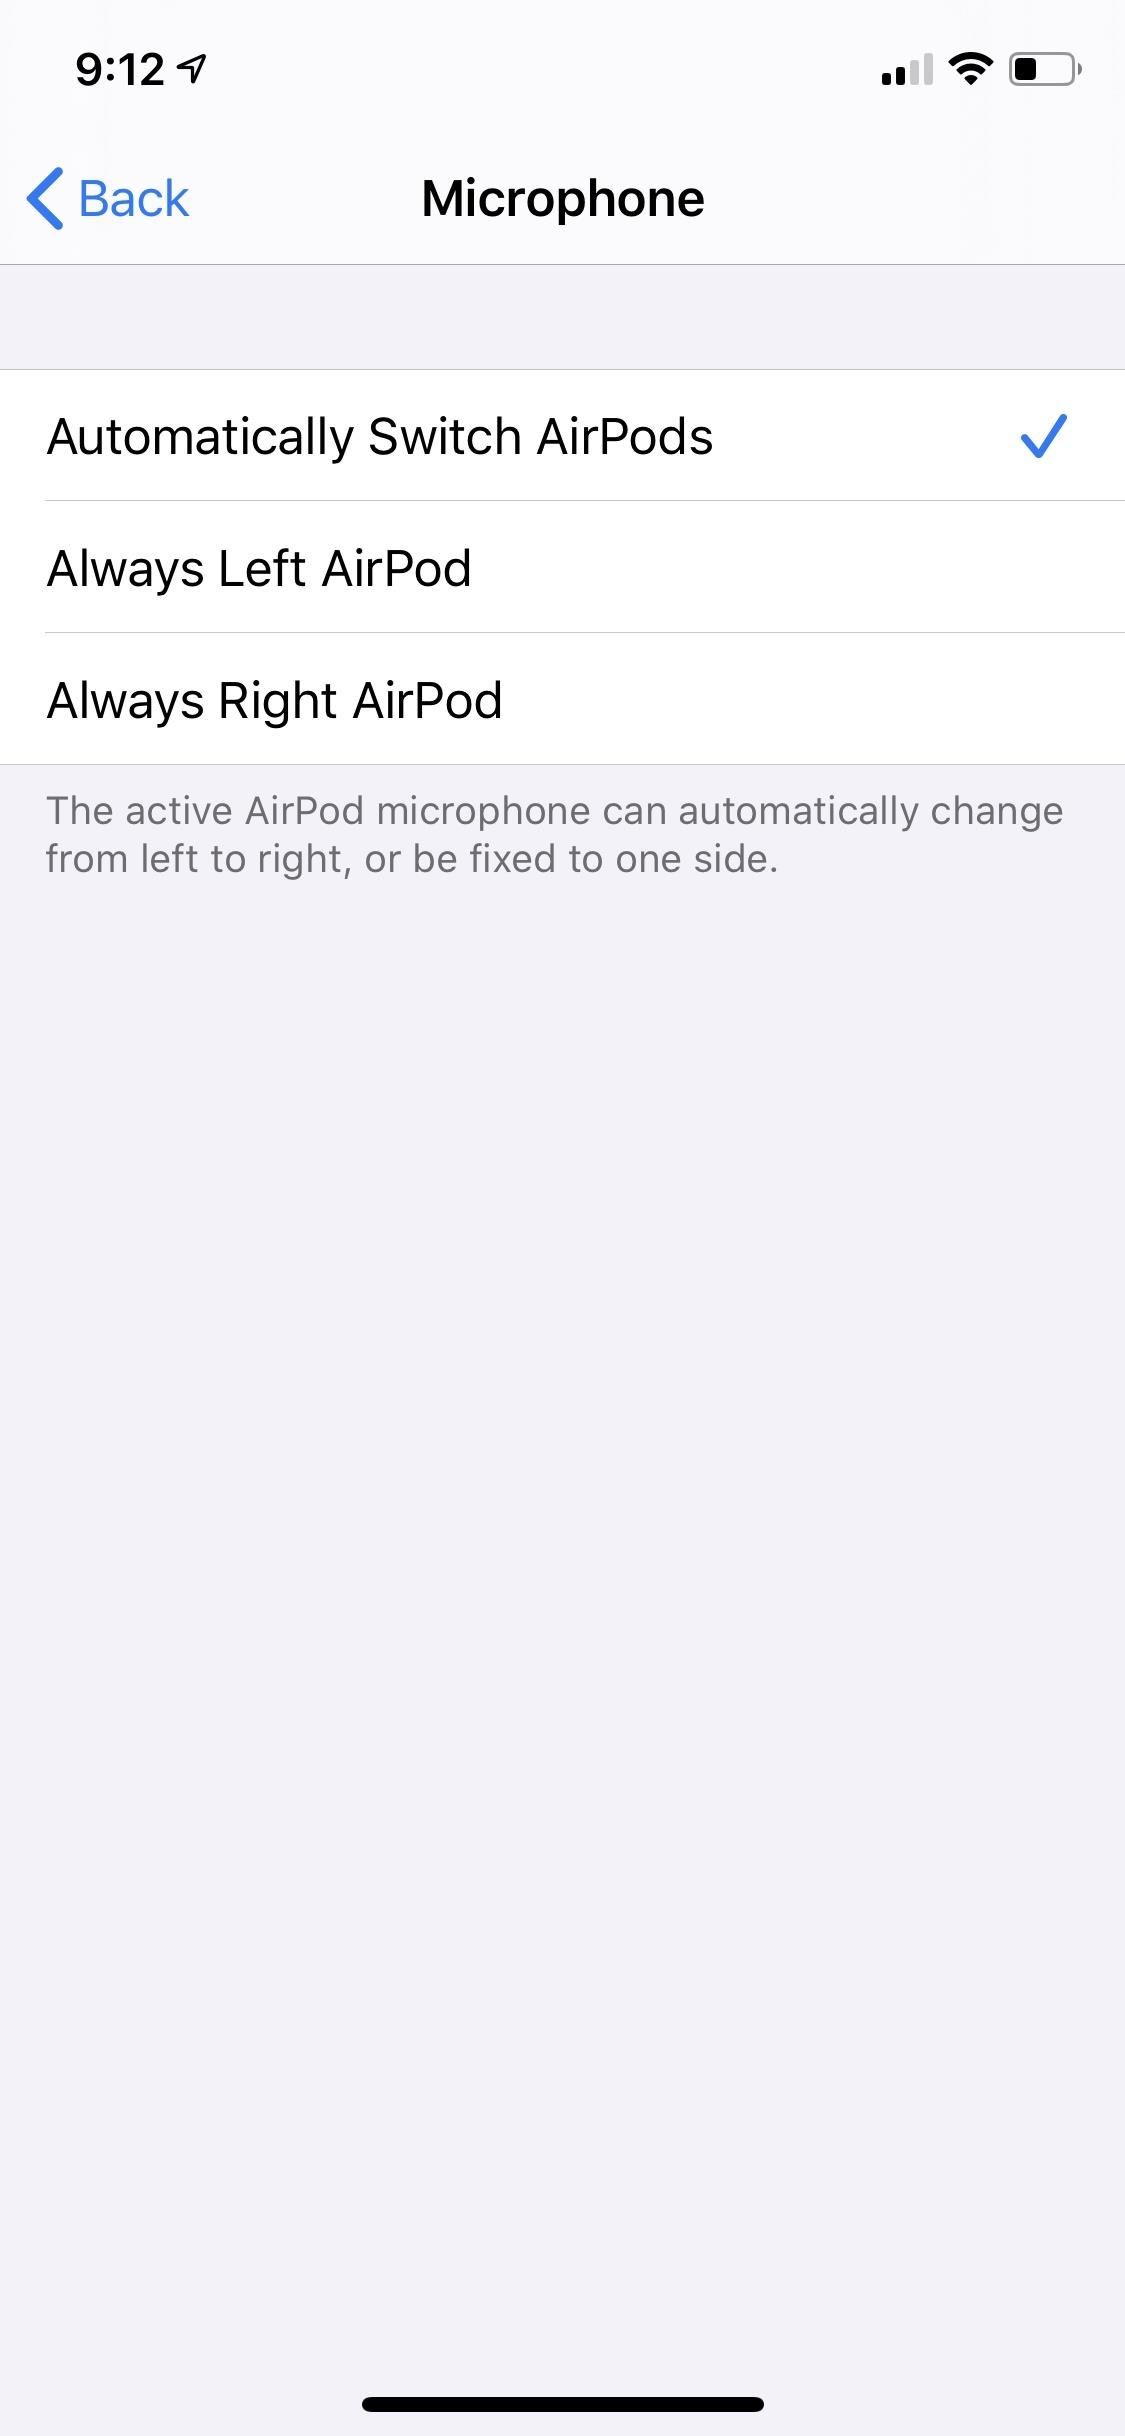 How to Switch the Default AirPods Microphone to Stick to Your Preferred Ear